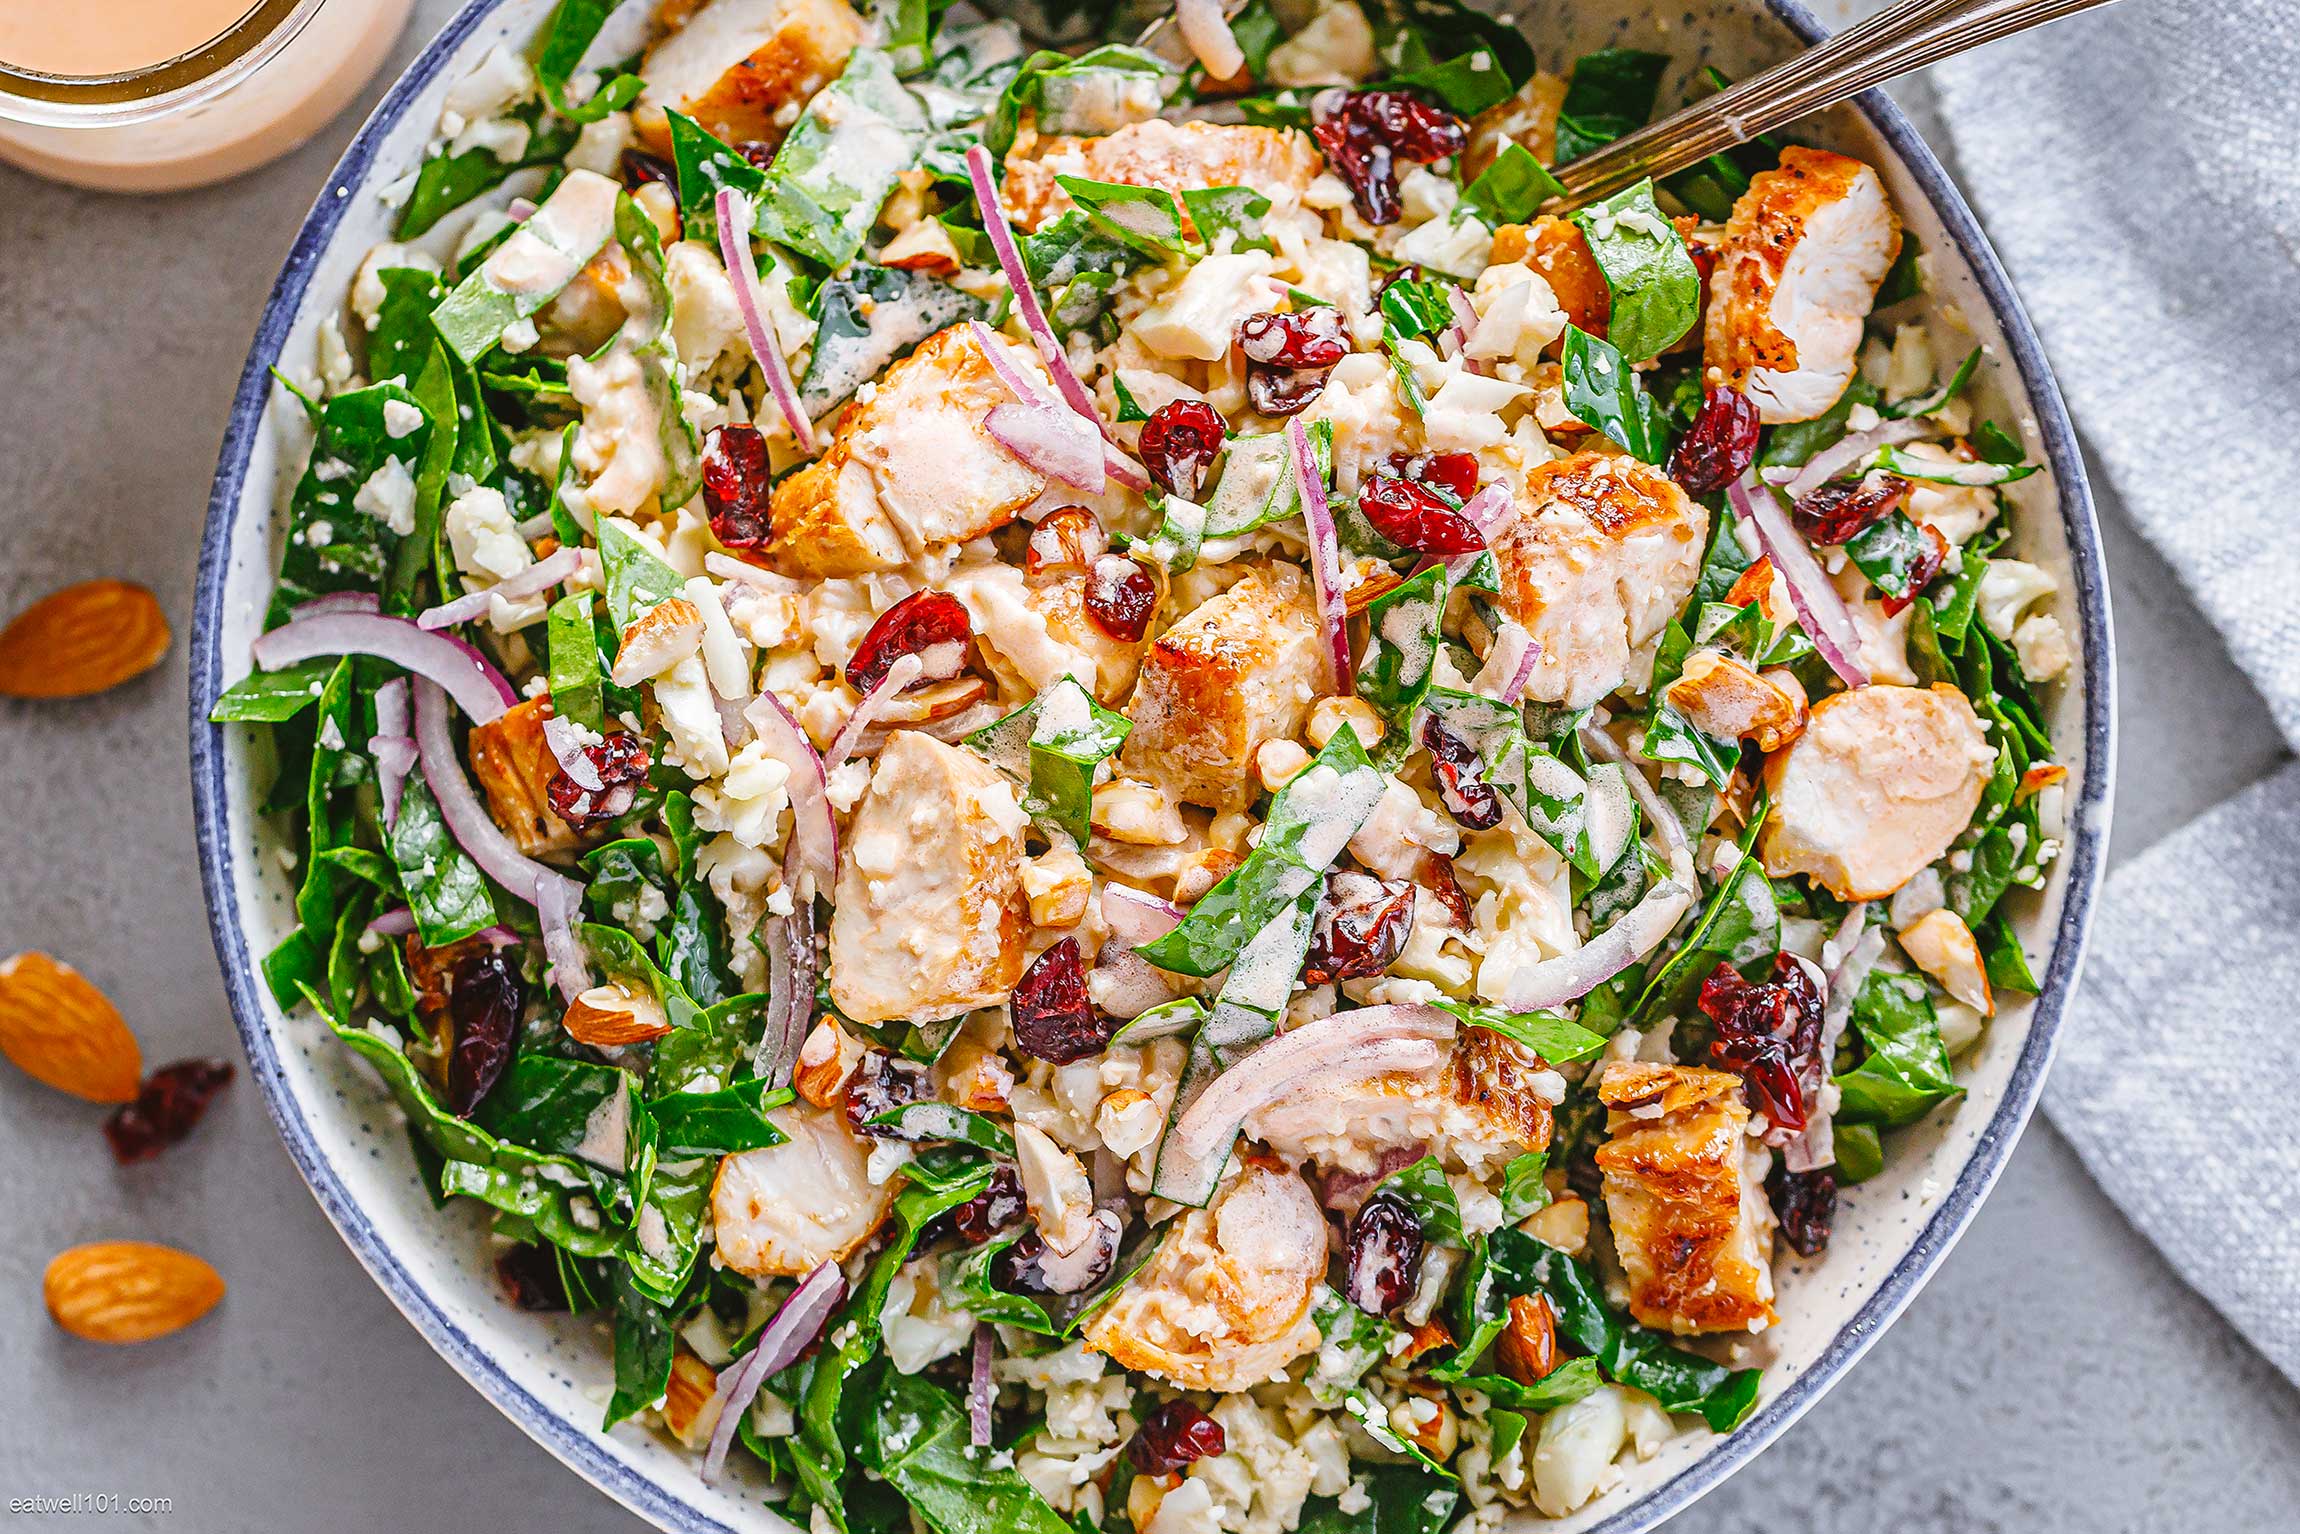 17 Yummy Fall Salads for a Lighter Lunch